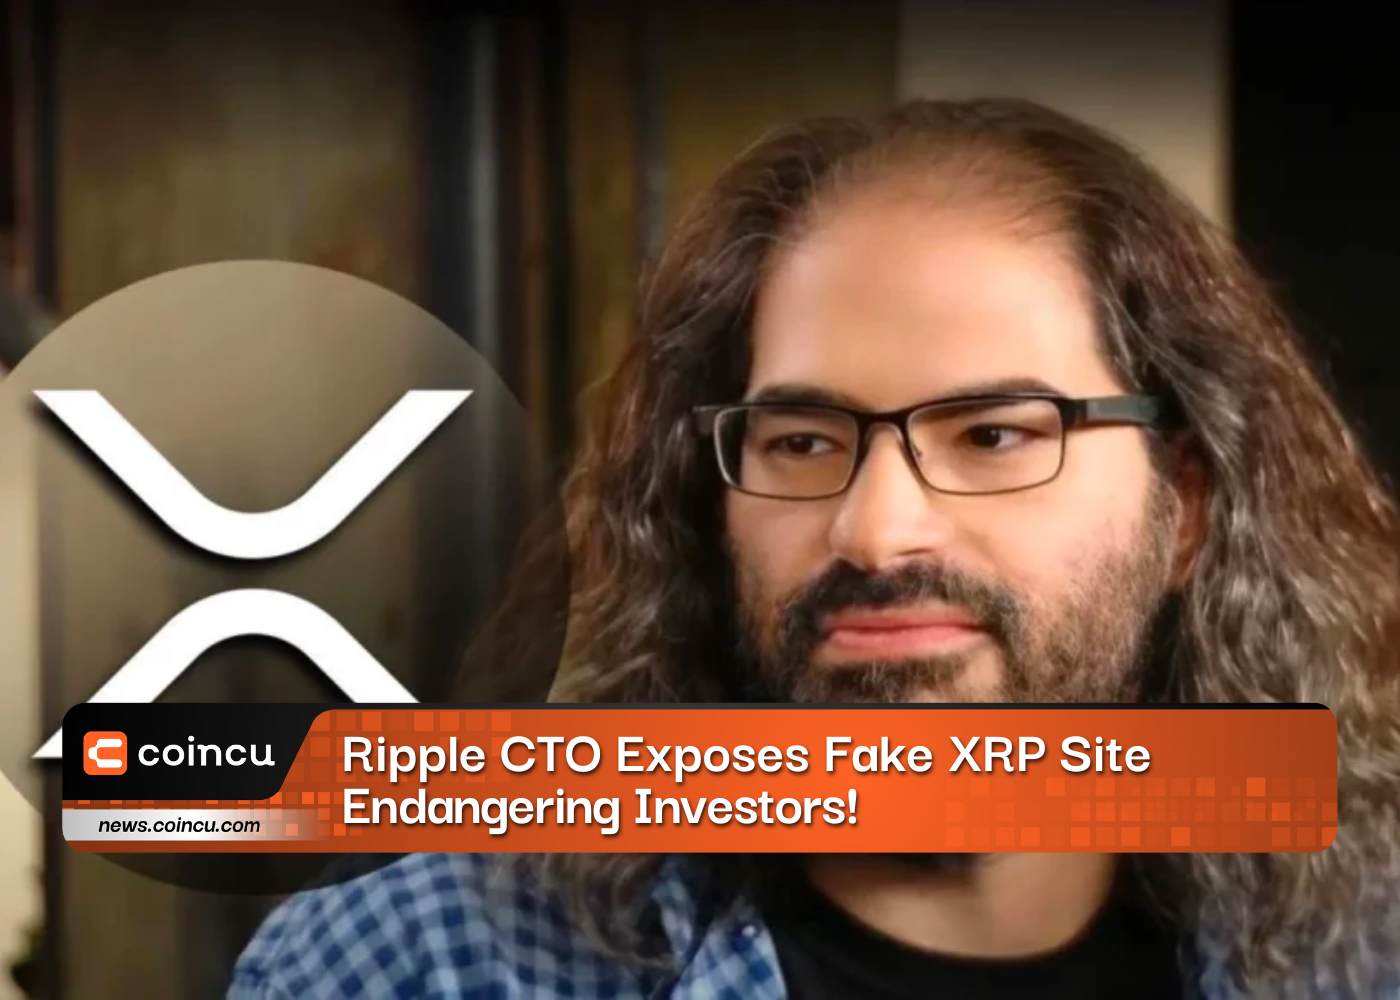 Ripple CTO Exposes Fake XRP Site